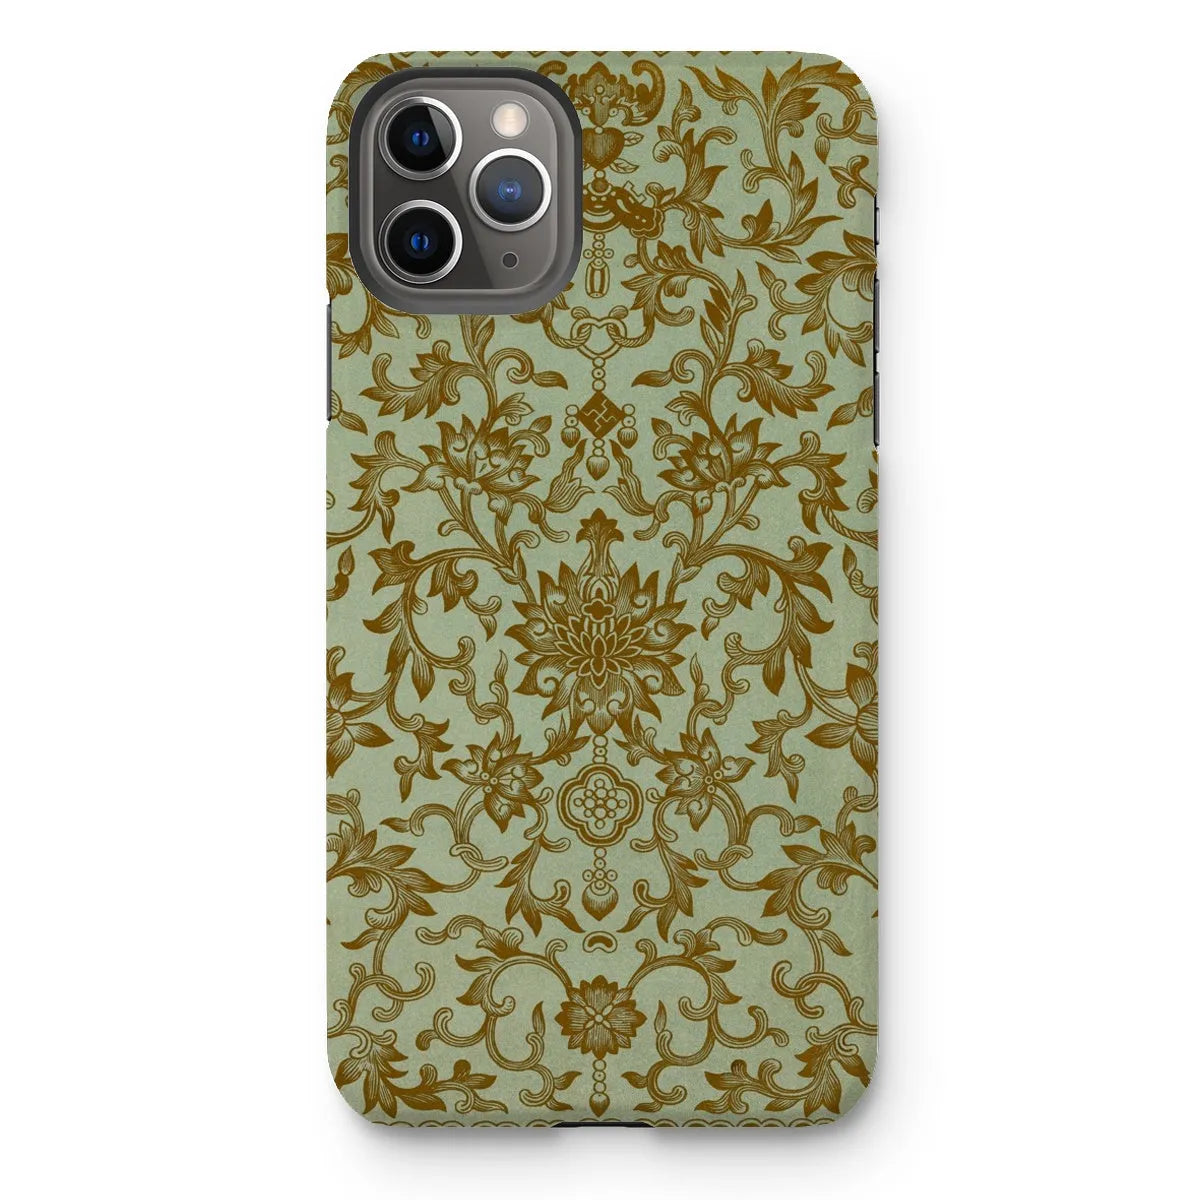 Earthy Chinese Floral Art Pattern Phone Case - Owen Jones - Iphone 11 Pro Max / Matte - Mobile Phone Cases - Aesthetic